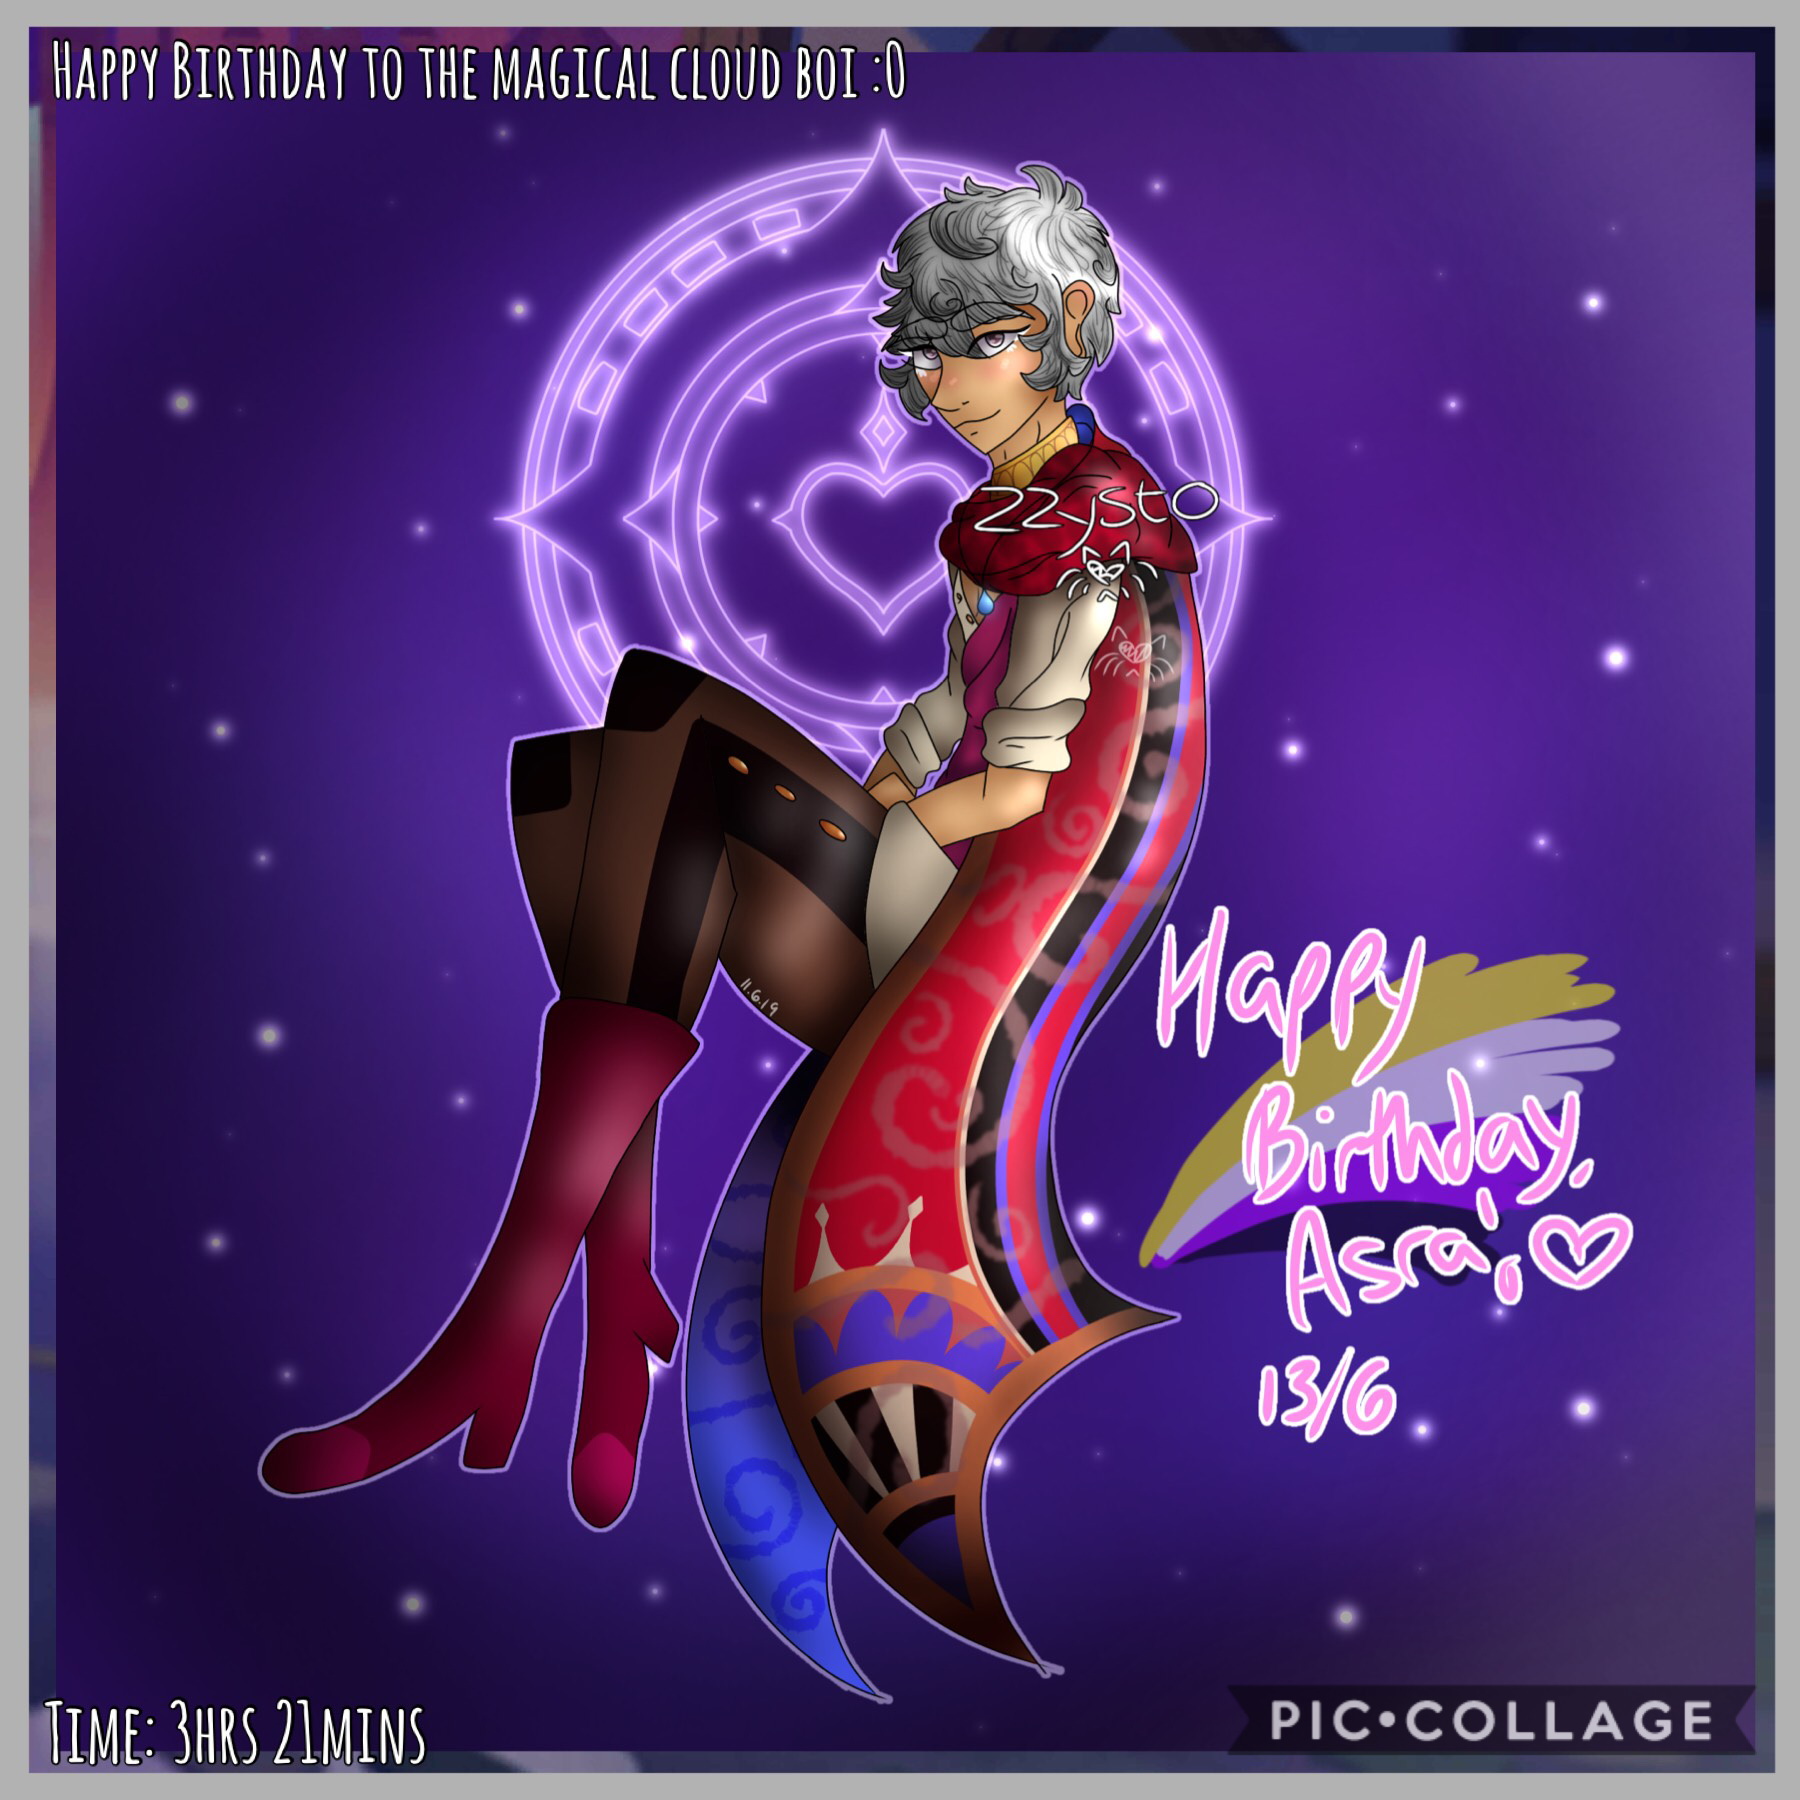 🔮Tap🔮
-Look in remixes please-
fiNALLY AHHH HAPPY BIRTH mAgic bOi- I’m really proud of how this came out! I hope I did him some justice because never have I loved a character more than Asra Alnazar~ uwu
What a weird coincidence that I downloaded the game 